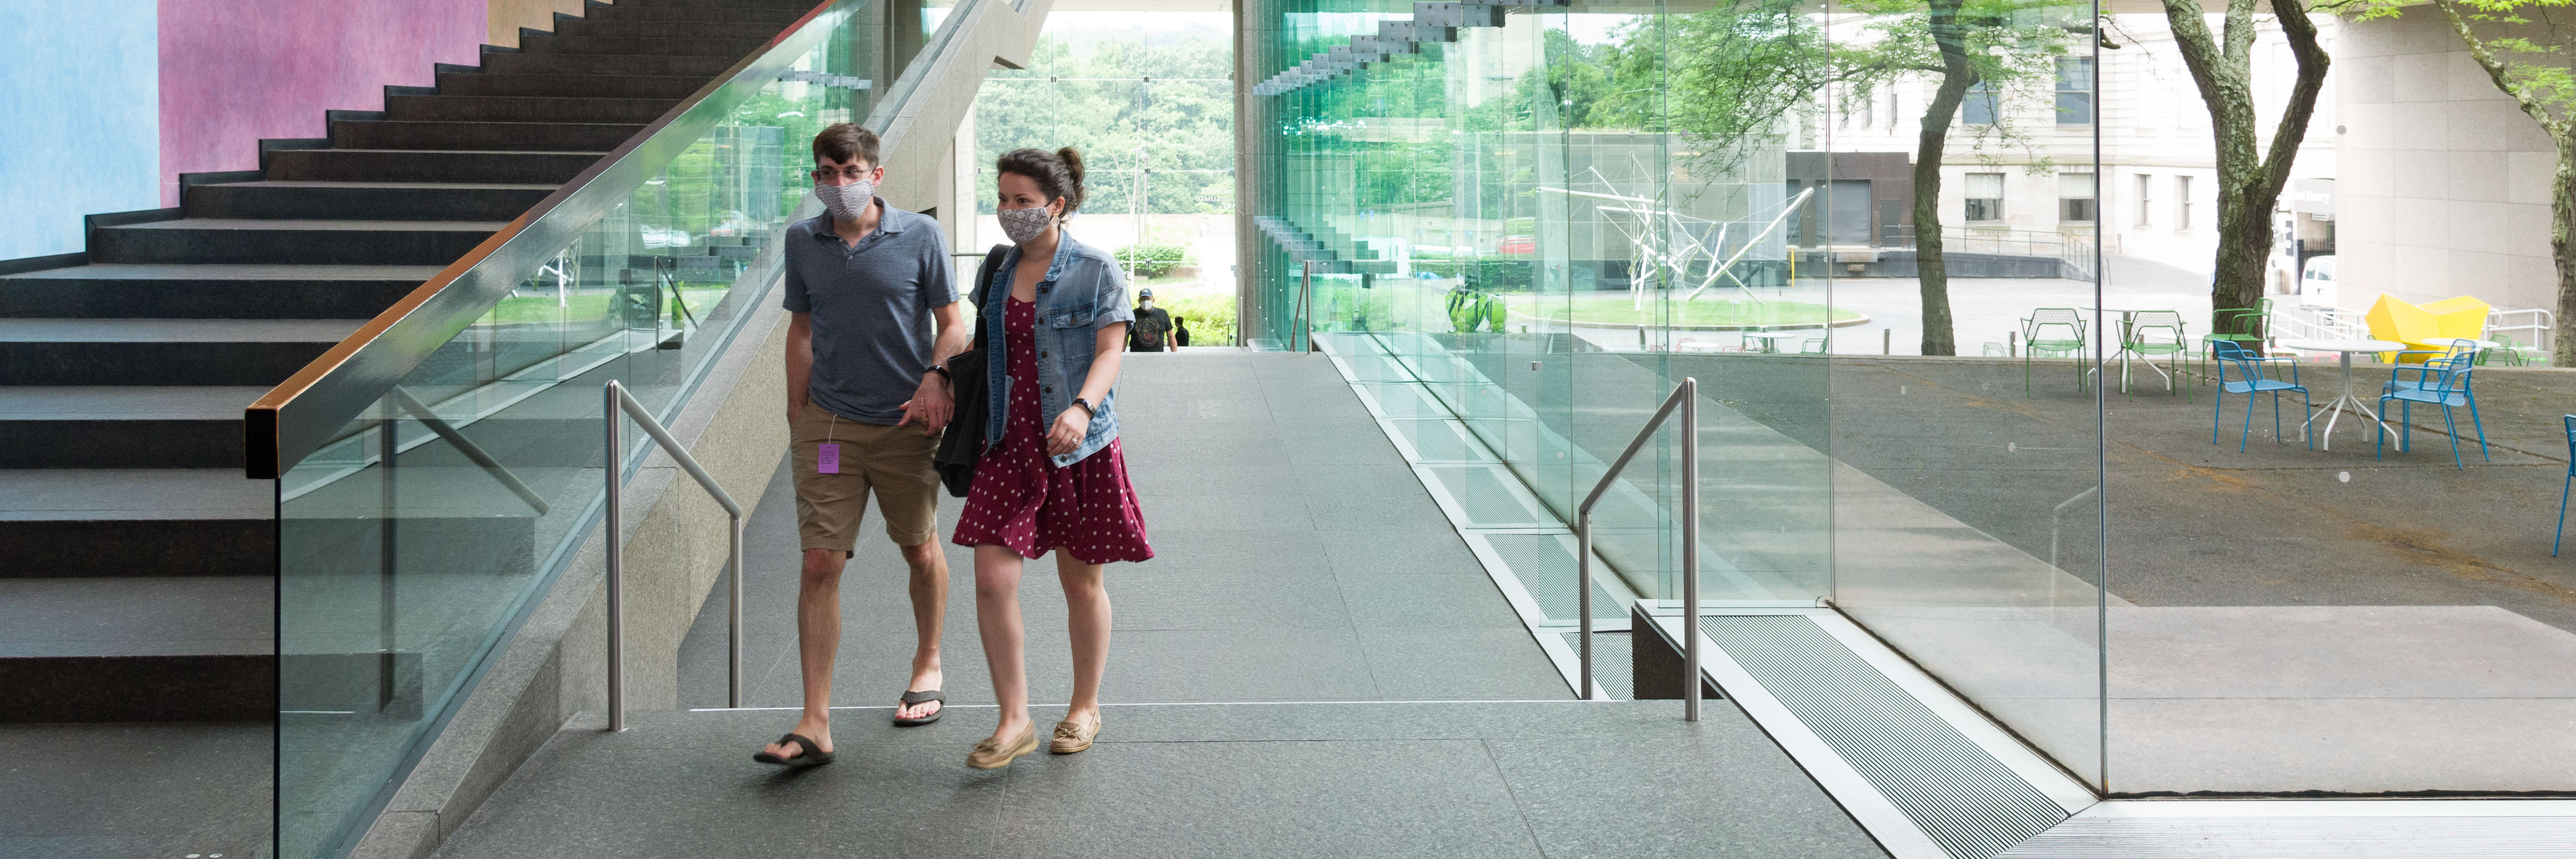 A couple walking past a stairway holding hands with a courtyard visible through glass walls behind them